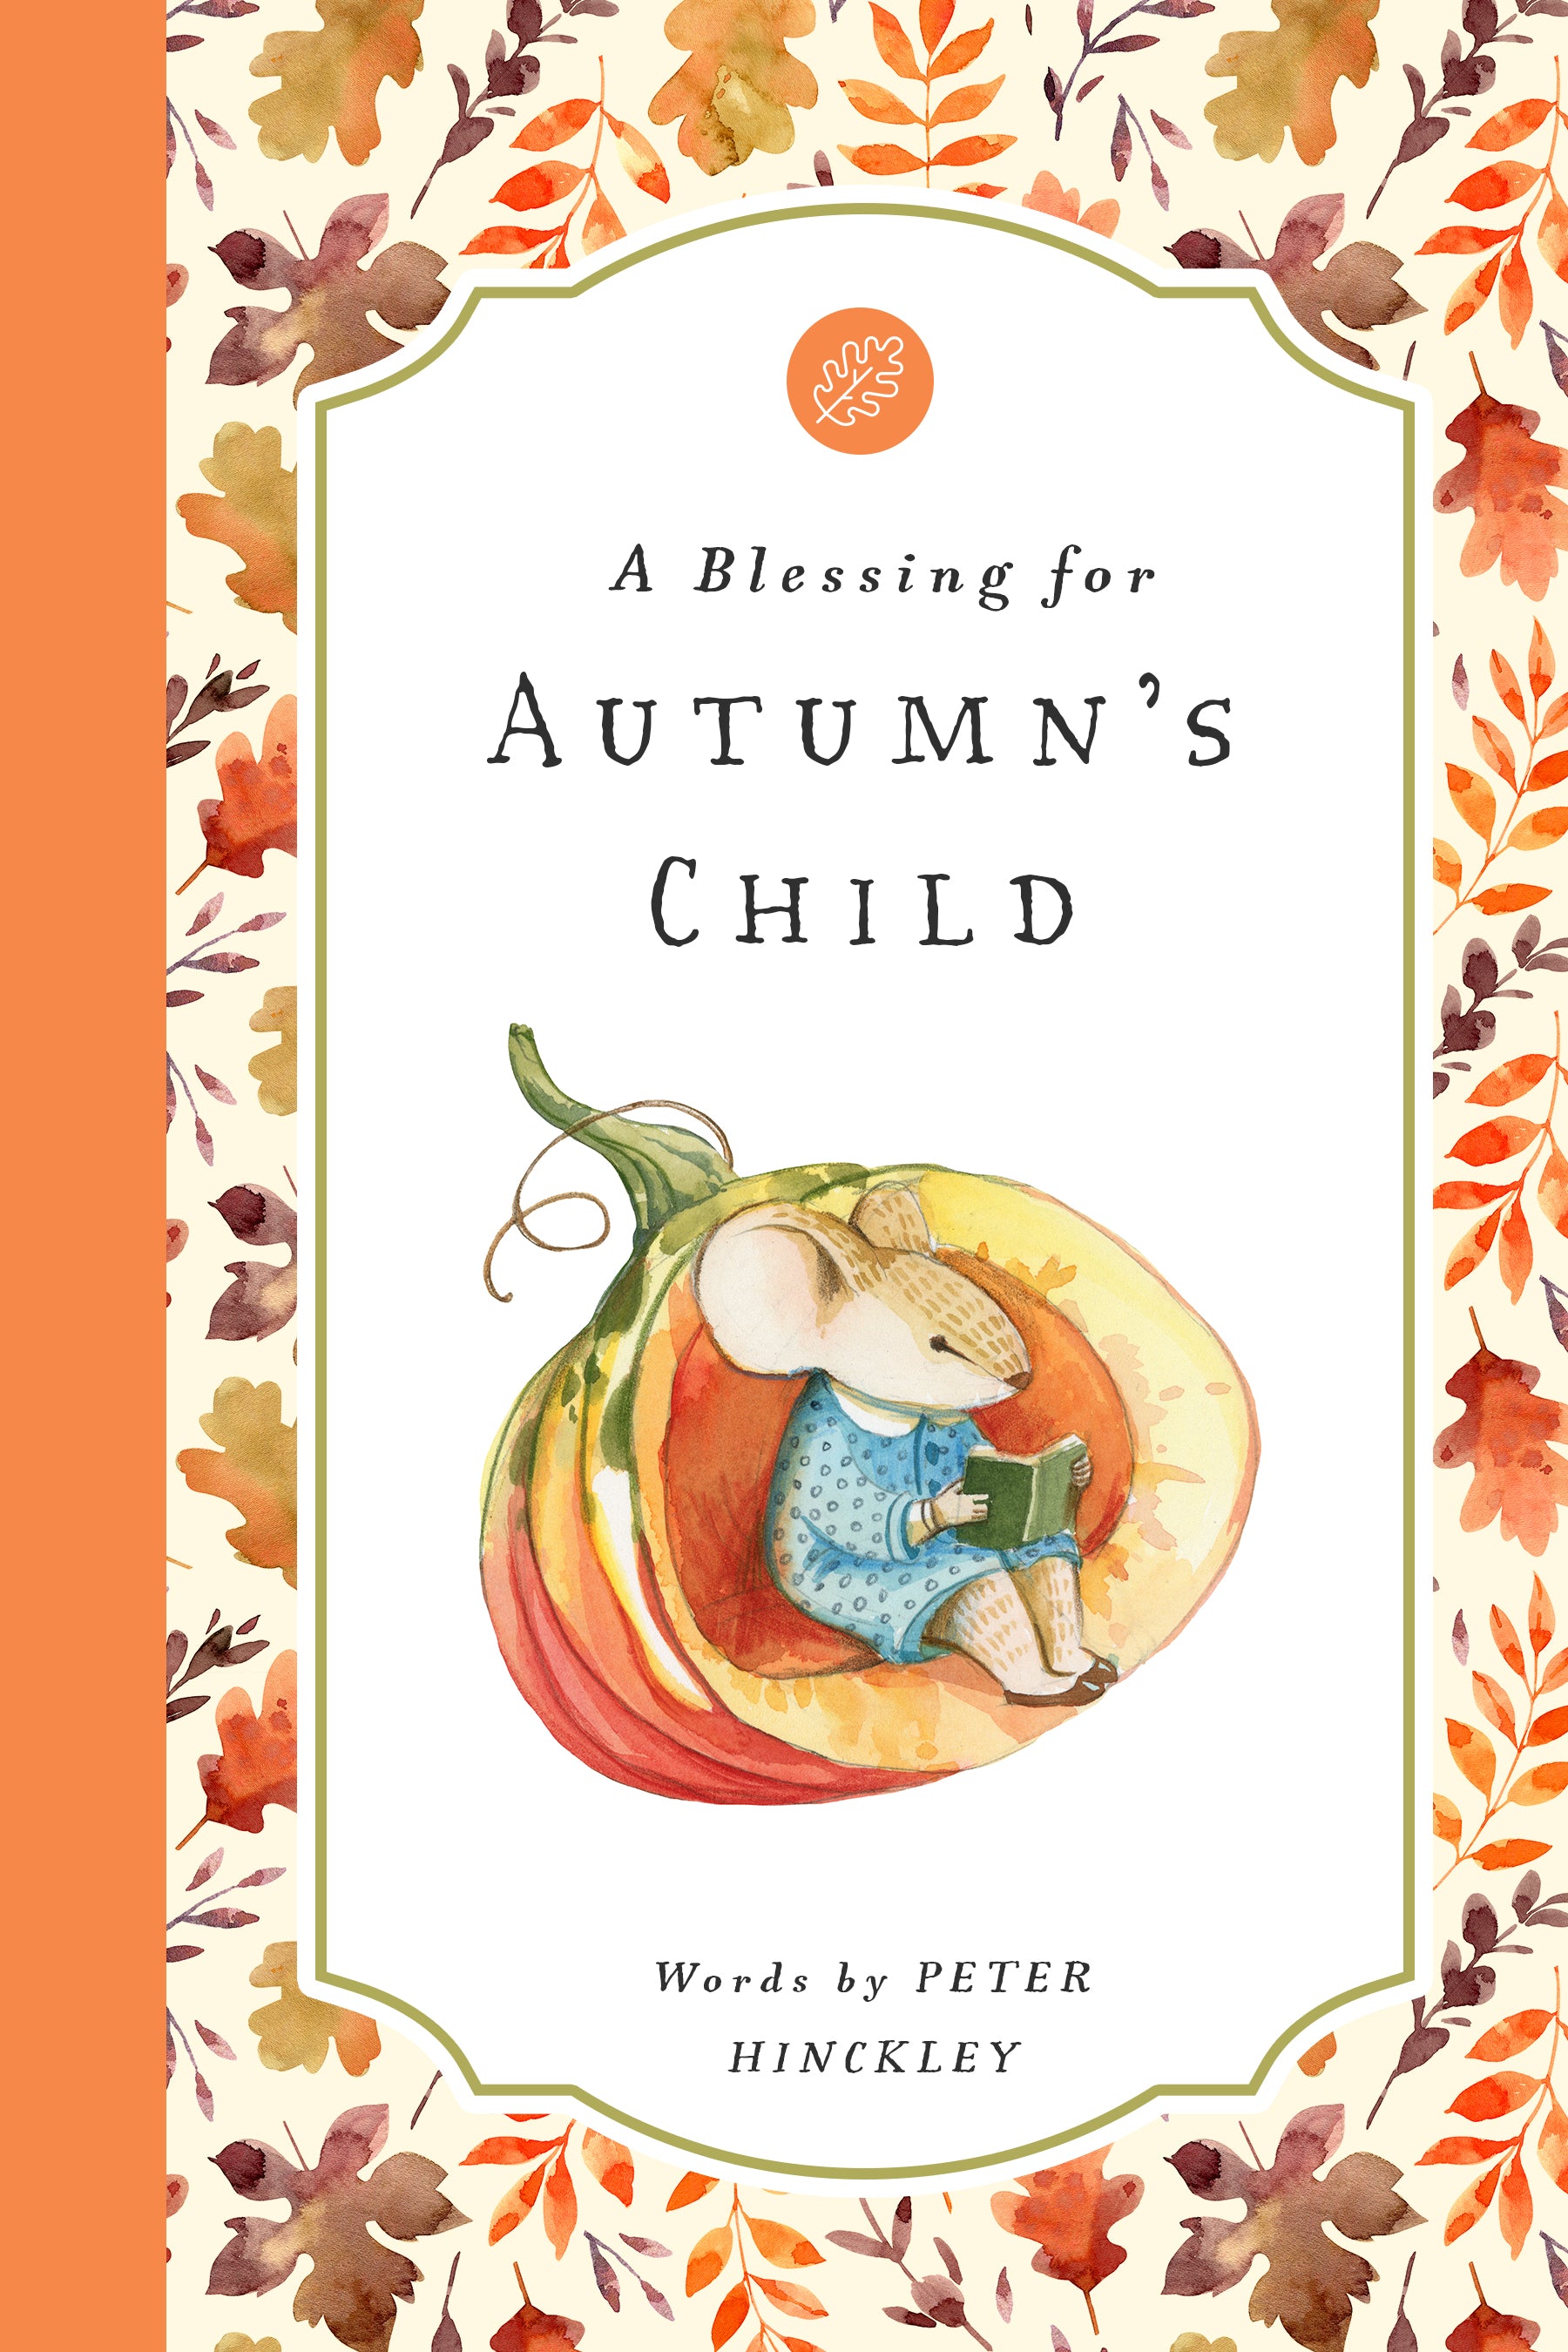 A Blessing for Autumn’ Child